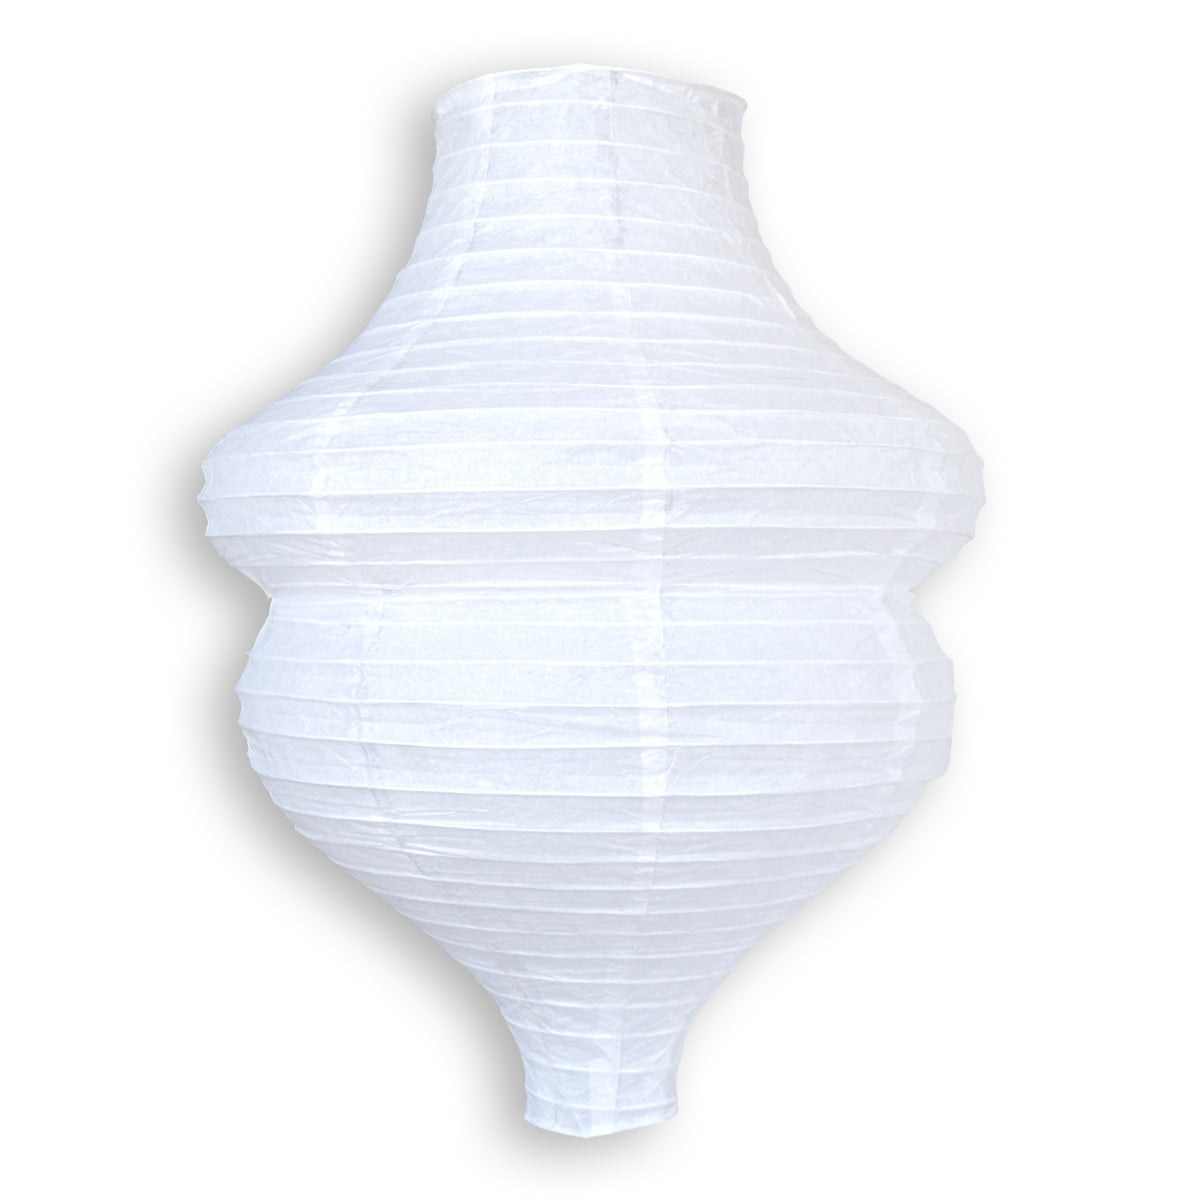 White Beehive Unique Shaped Paper Lantern, 16-inch x 22-inch